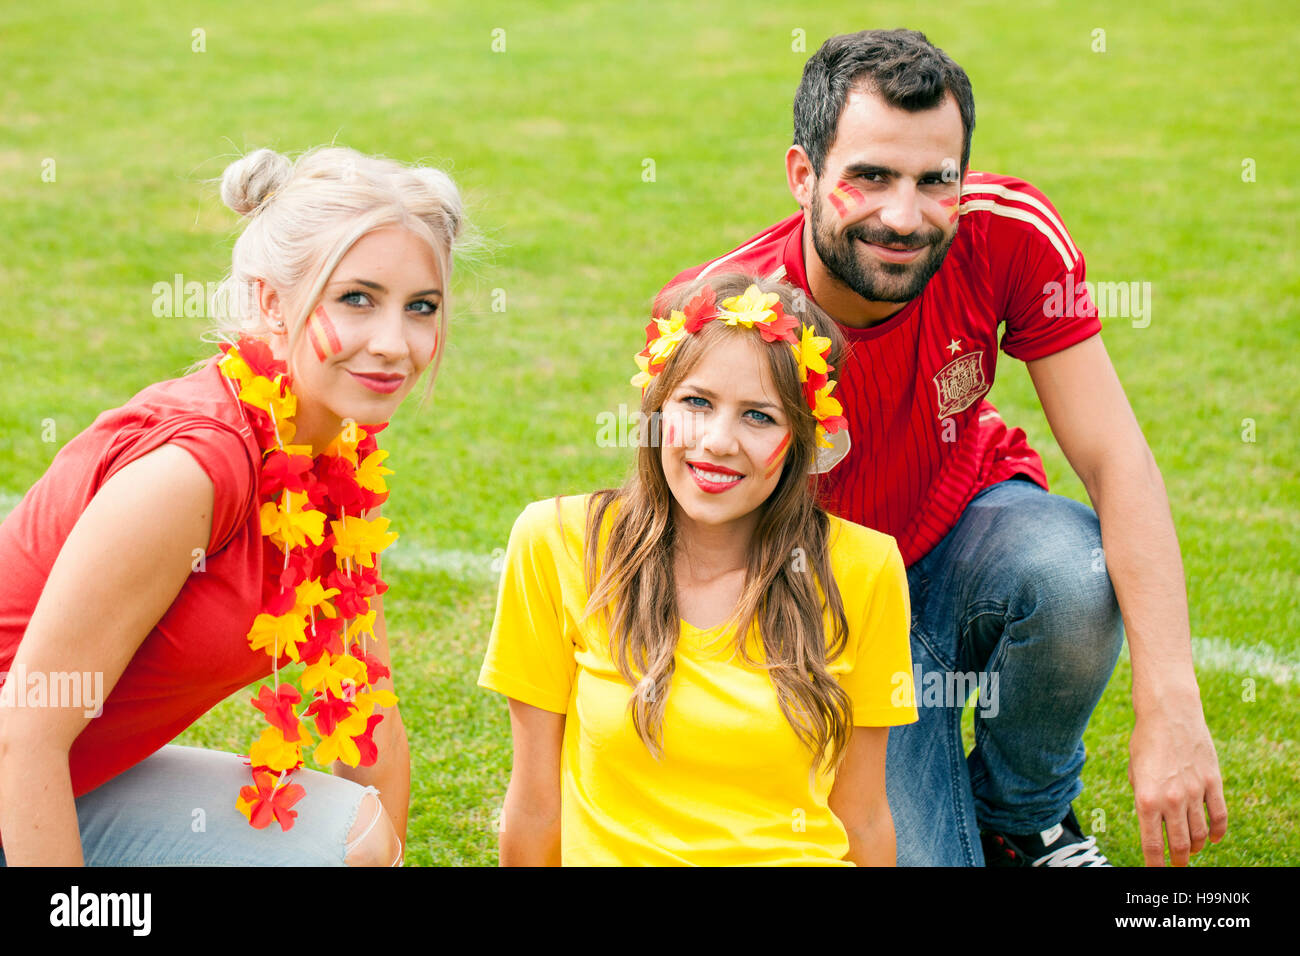 Spanish soccer friends with face paint and floral garland Stock Photo